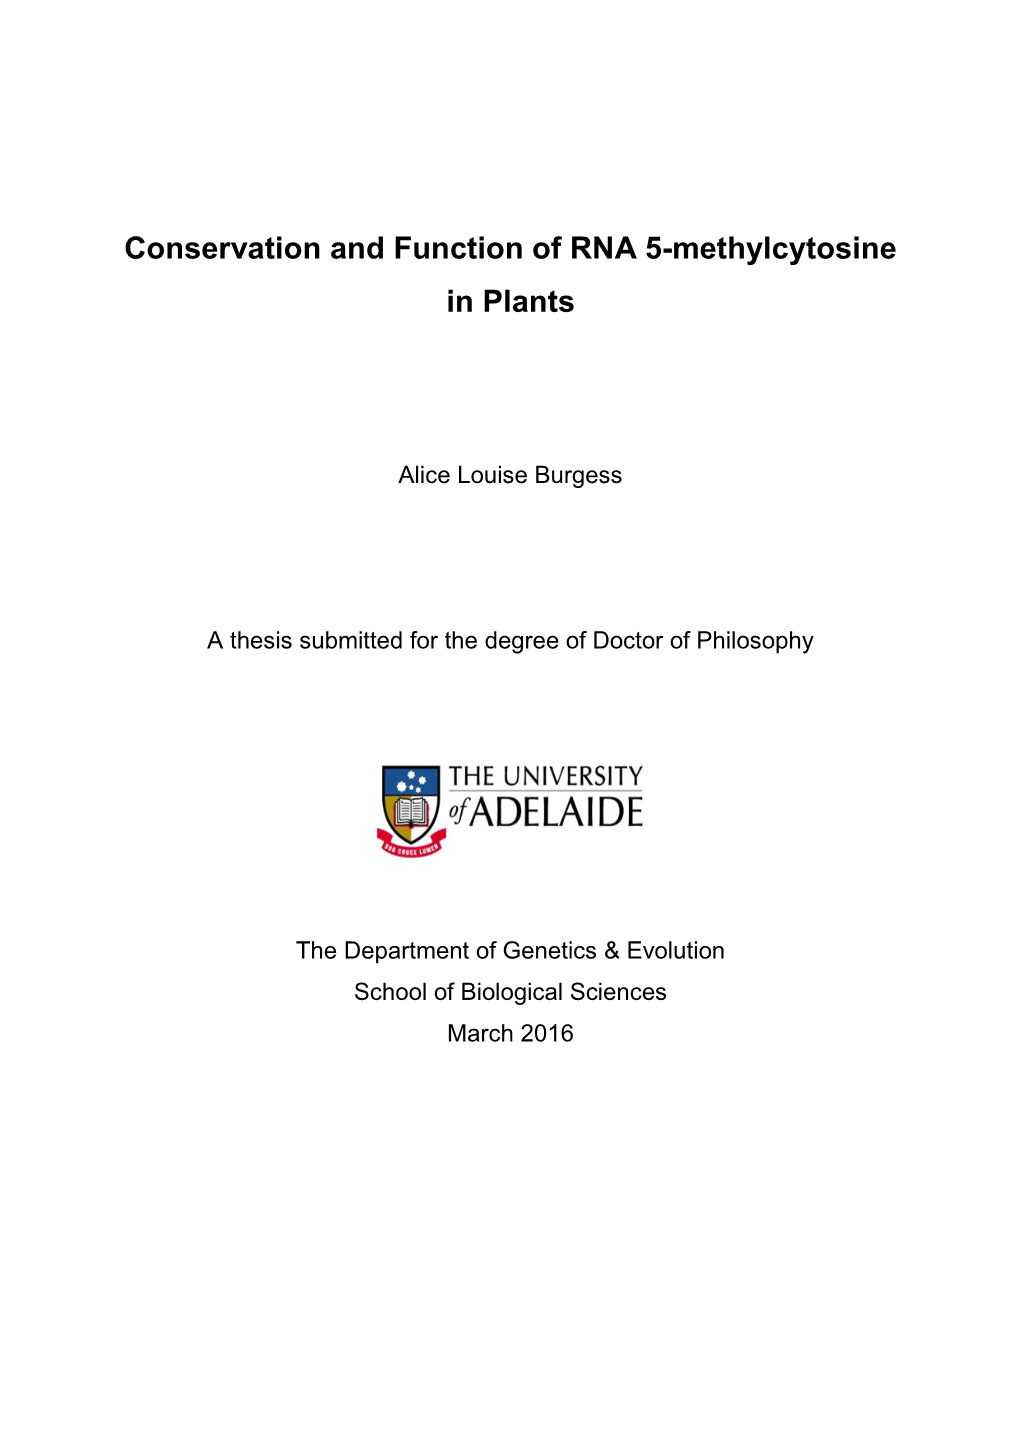 Conservation and Function of RNA 5-Methylcytosine in the Plants